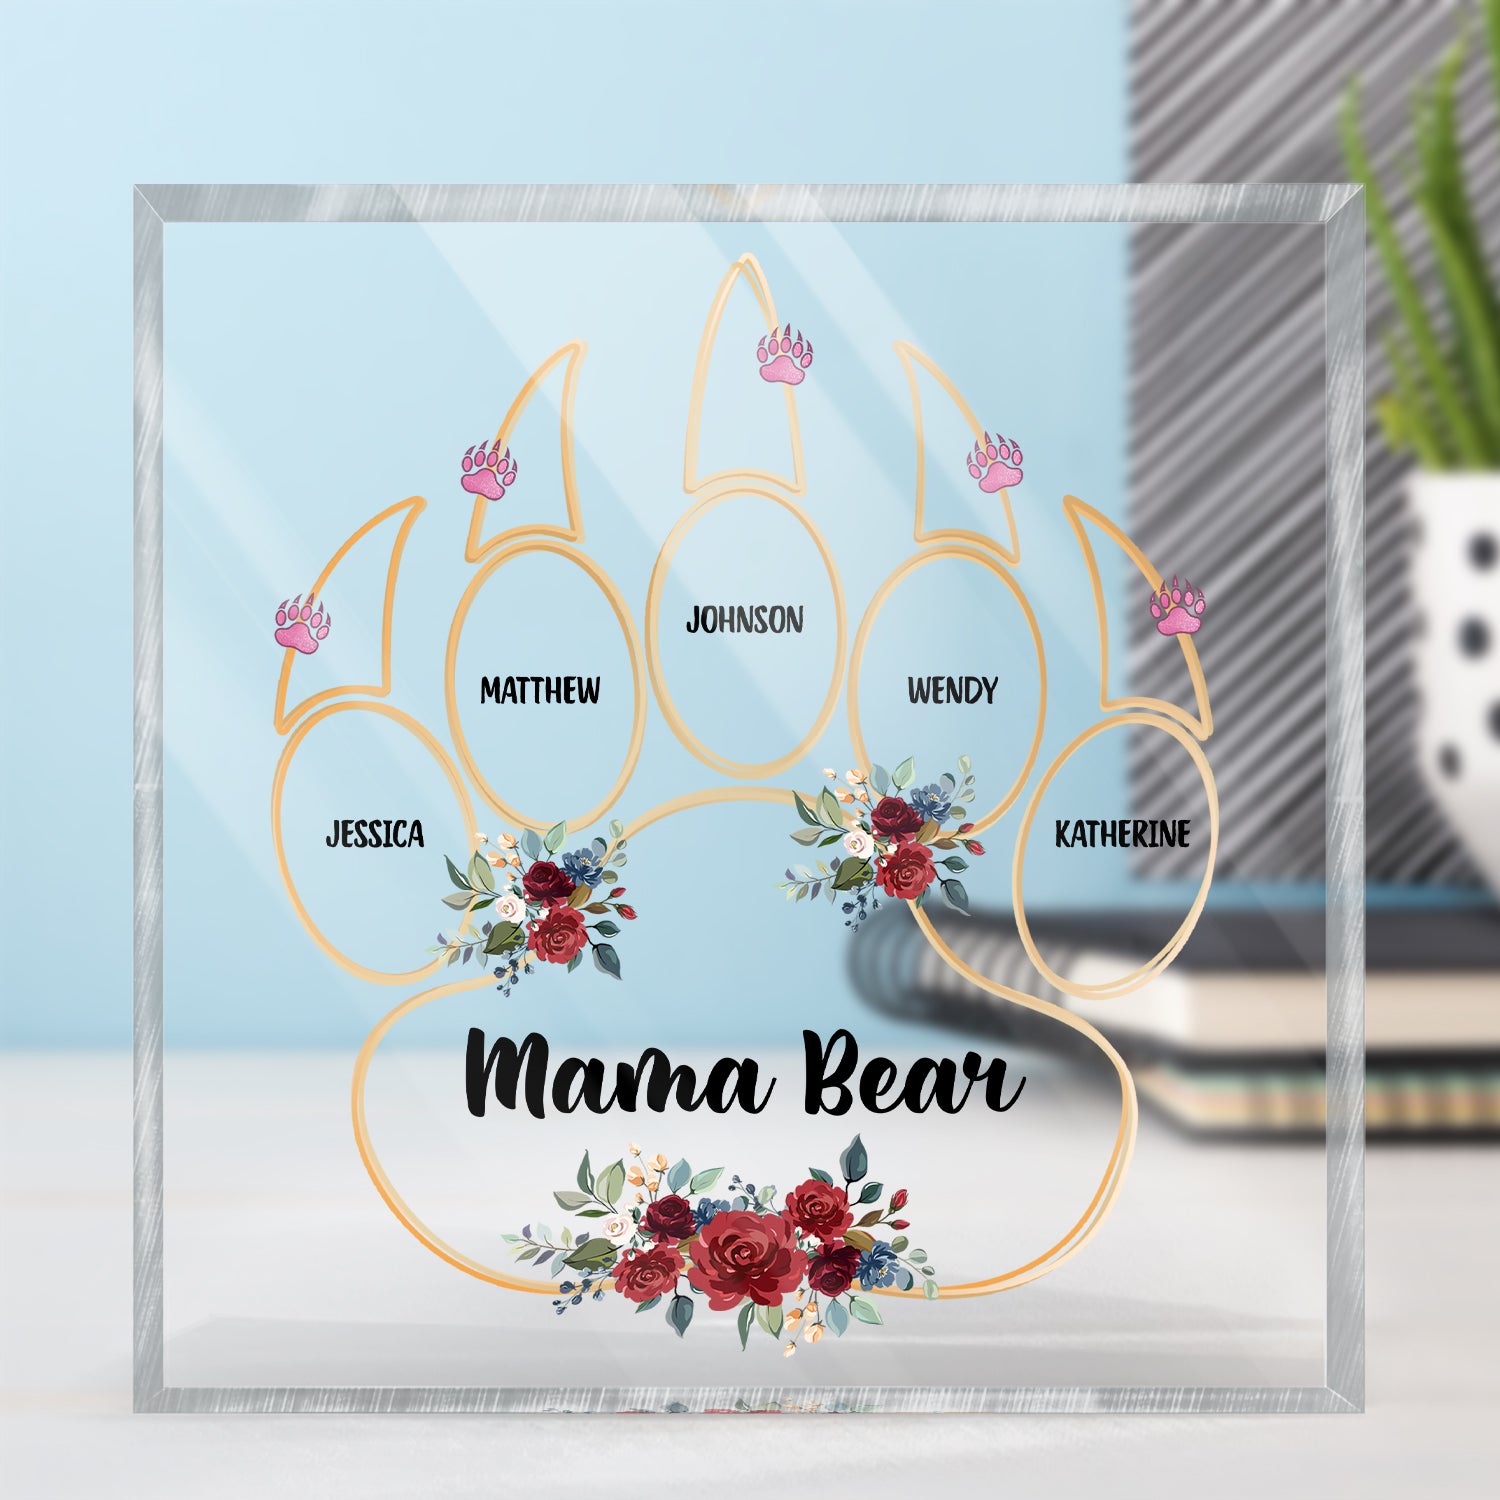 Mama Bear - Gift For Grandma, Mother - Personalized Square Shaped Acrylic Plaque